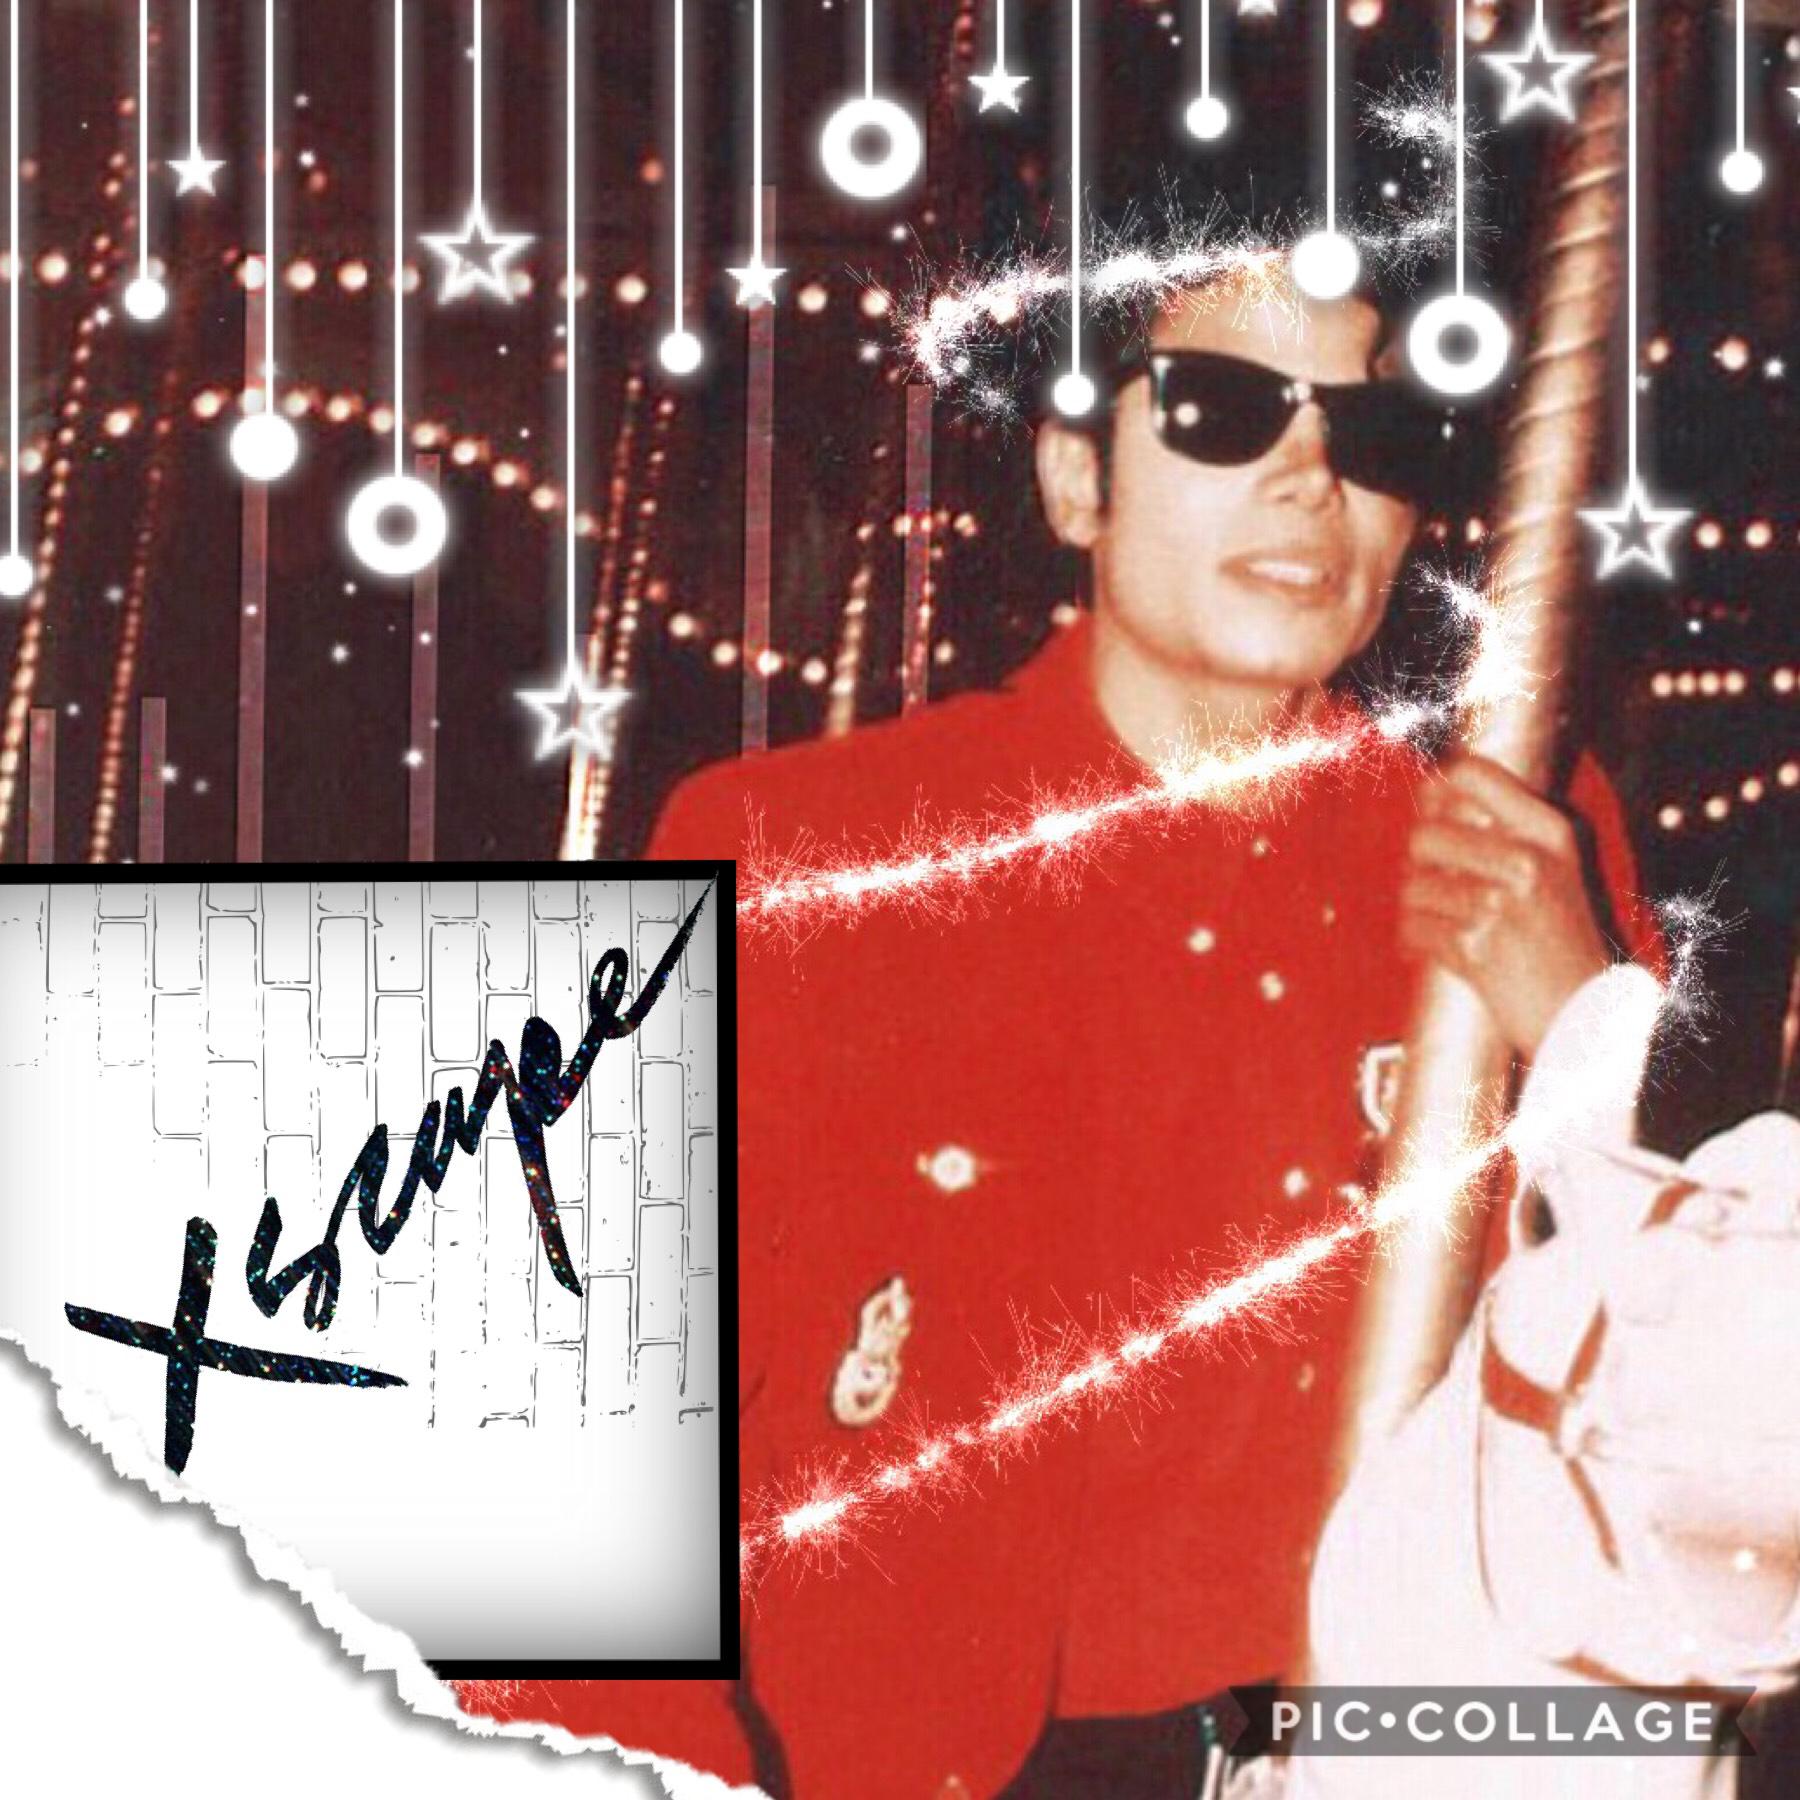   😊tap😂

Hiiiii! I haven’t posted in a couple weeks😬 oops! I had this collage ready but for some reason never posted it 😂 I’m on thanksgiving break as of today so hopefully I’ll post AT LEAST one more time by the time my break is over🤞🏻~xscape~ mj💕